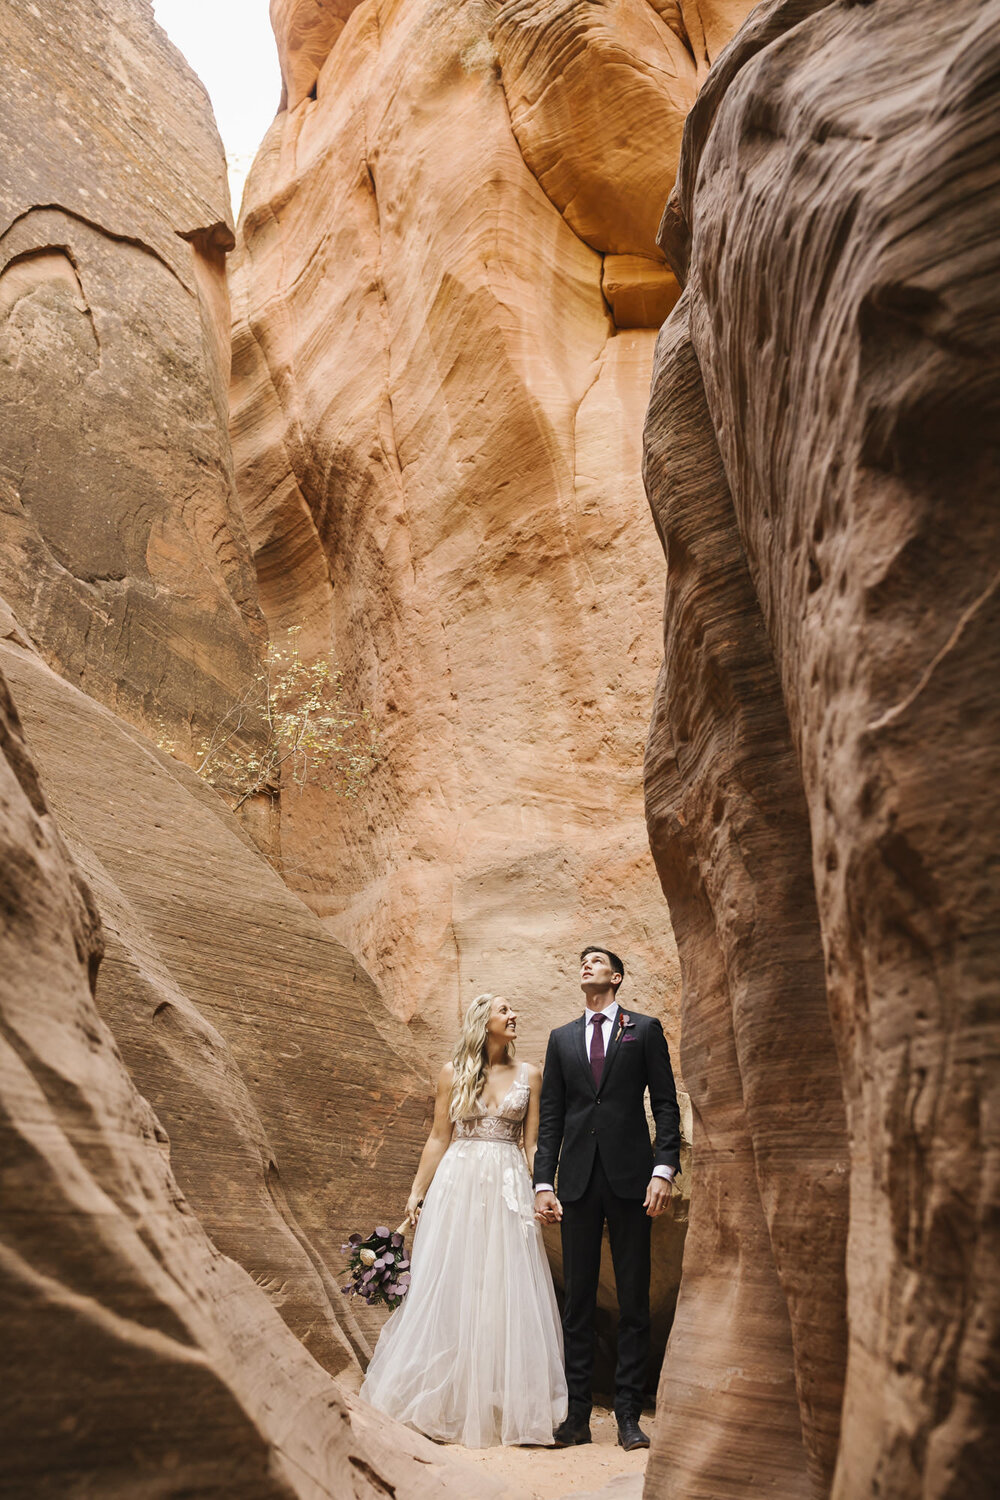 Wedding couple take in their surroundings in a slot canyon in Utah near Zion